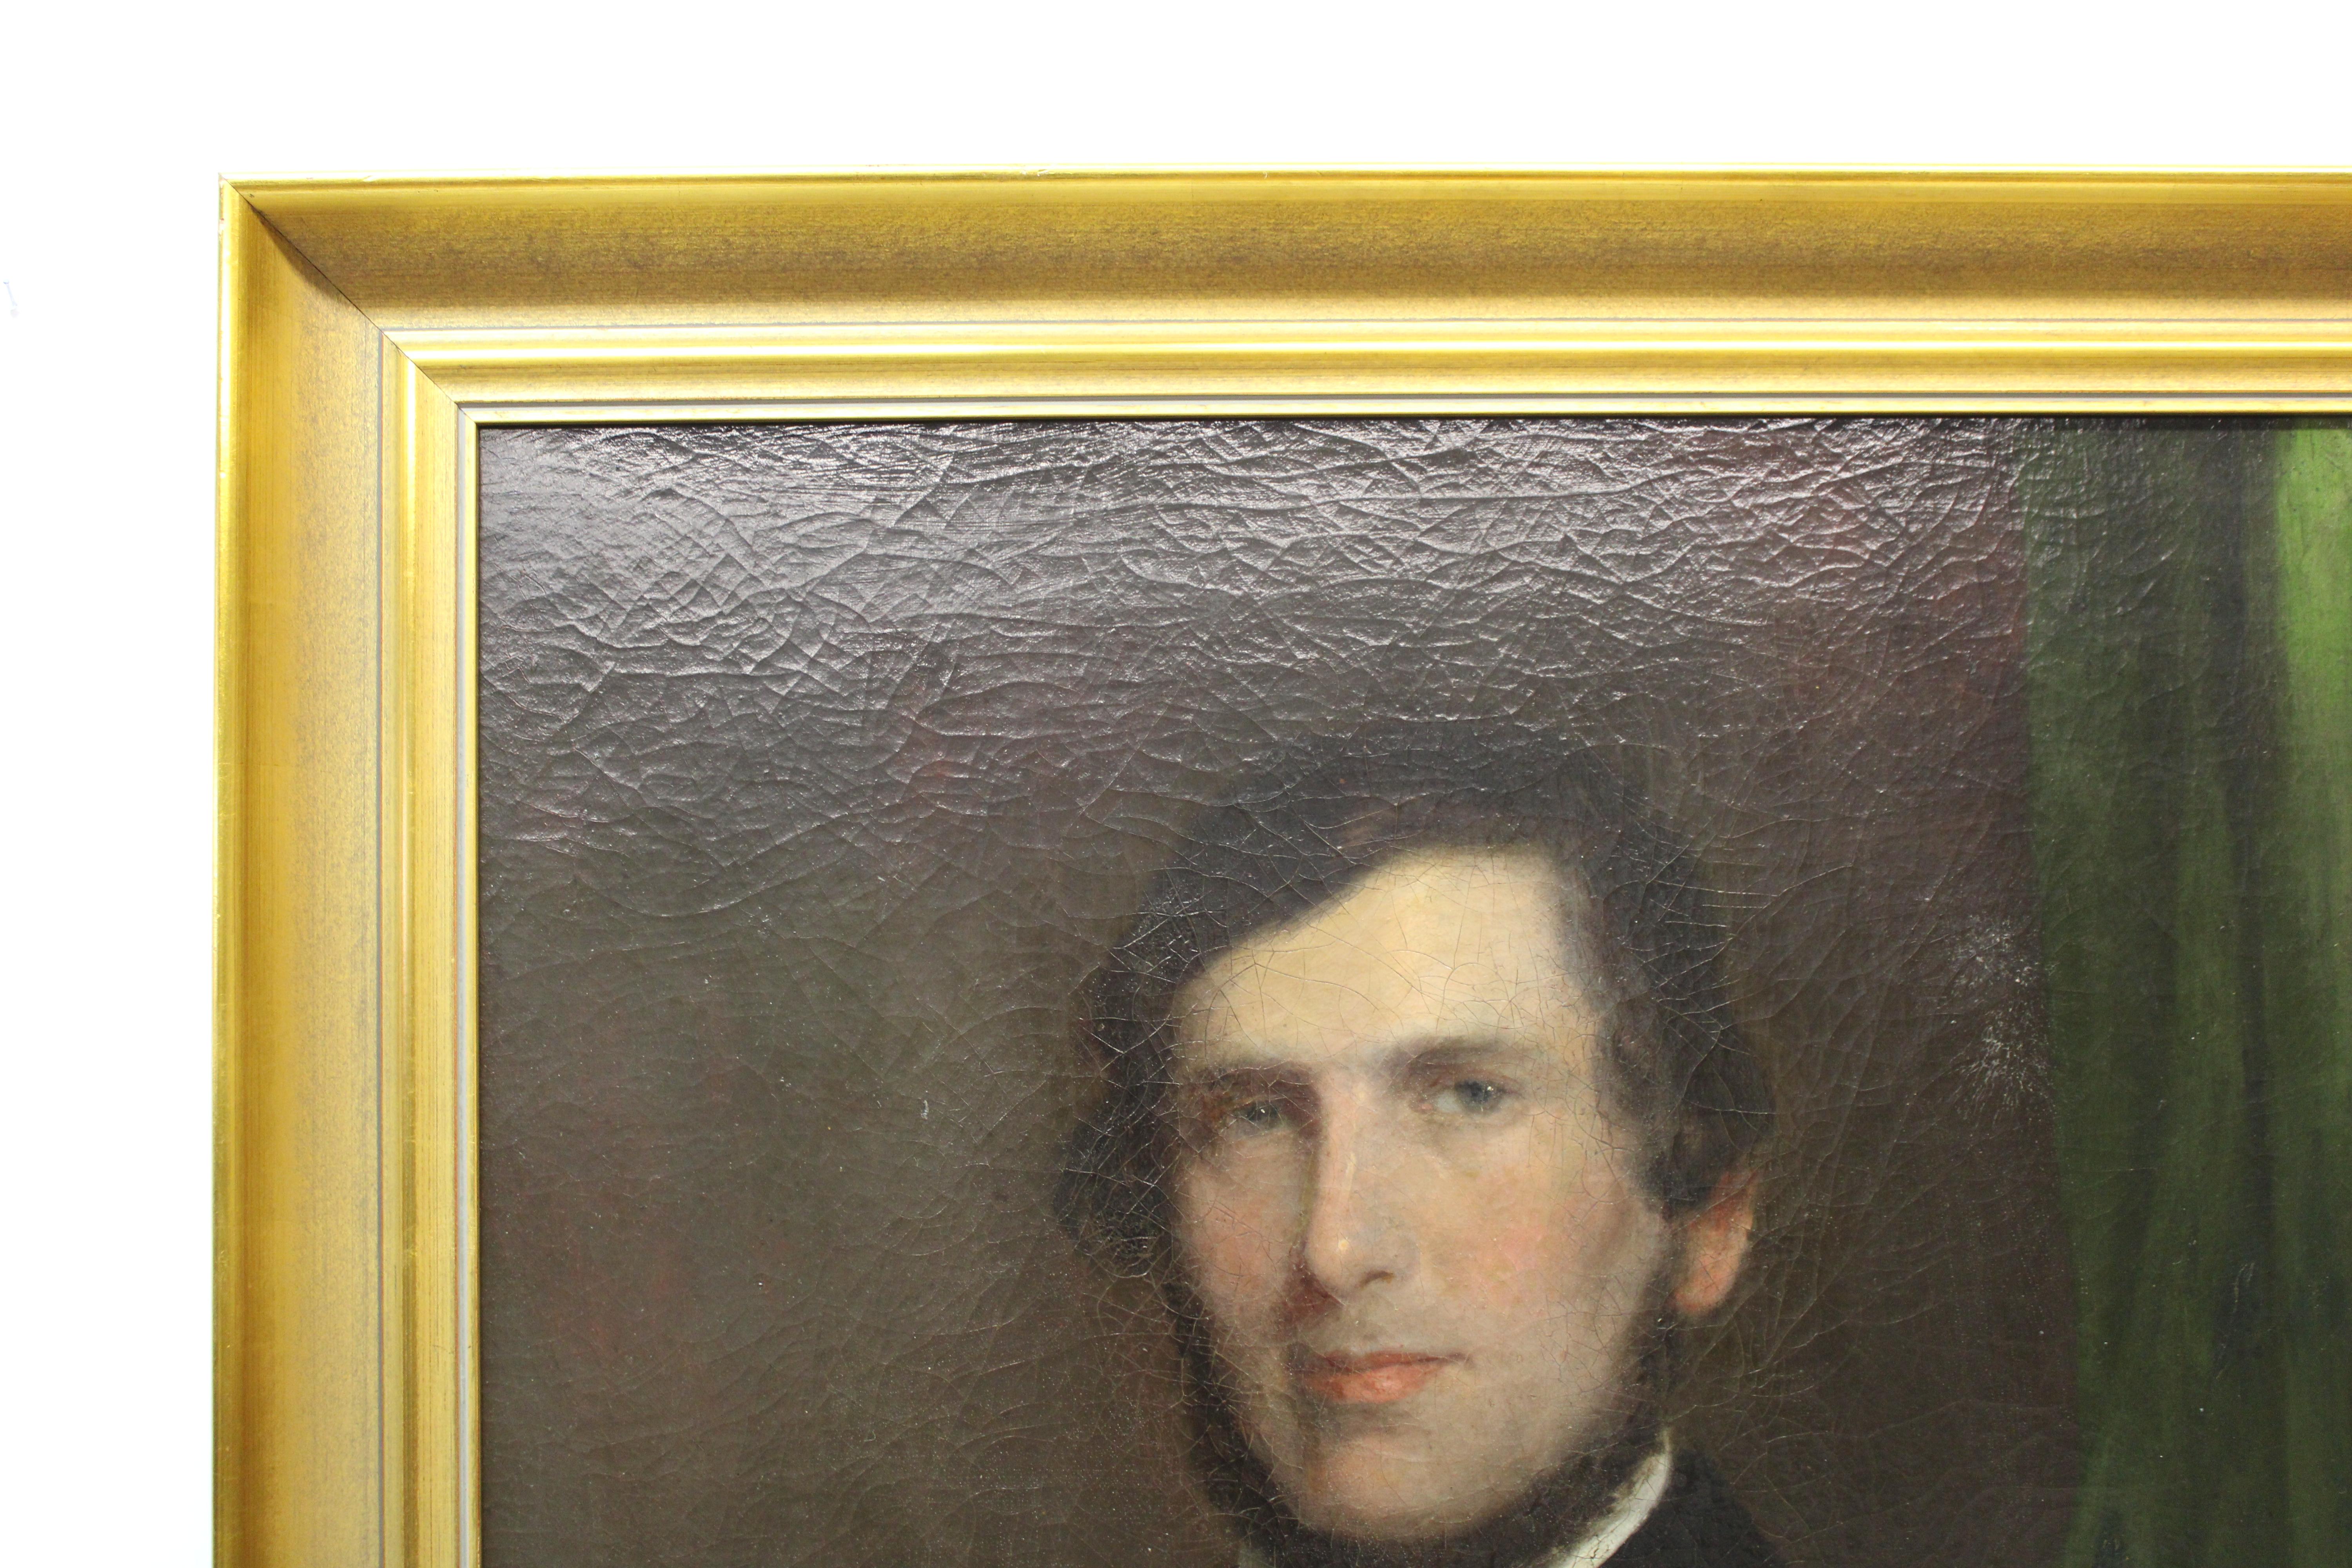 C. 19th Century - Stunning Portrait Painting of Charles Griffiths (1810 - 1880)

Oil on Canvas